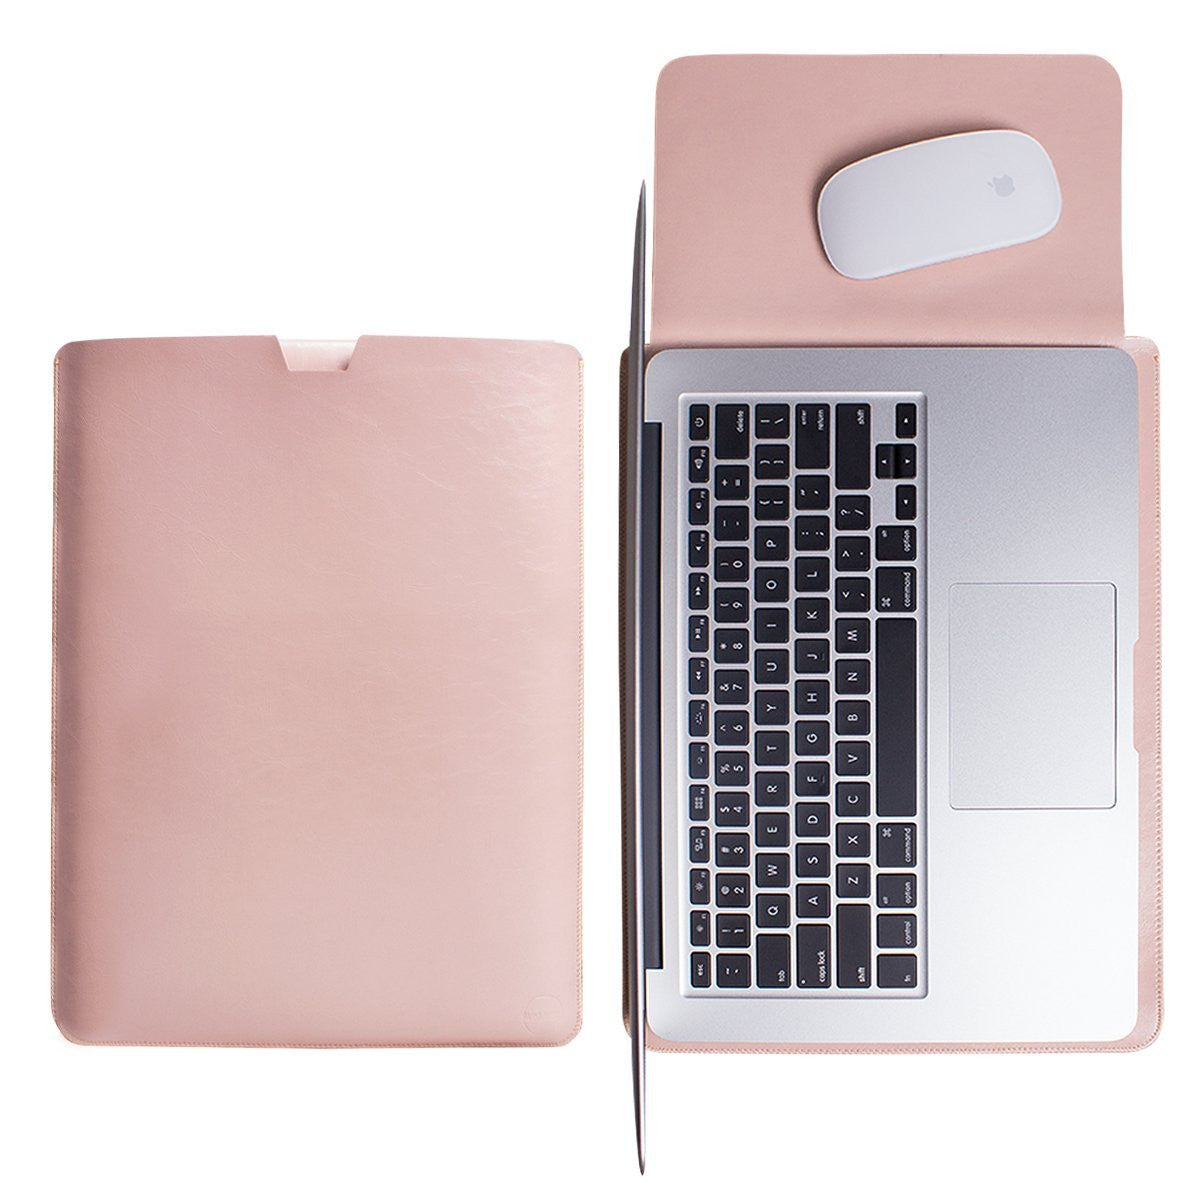 Macbook Leather Sleeve Cover - Pink